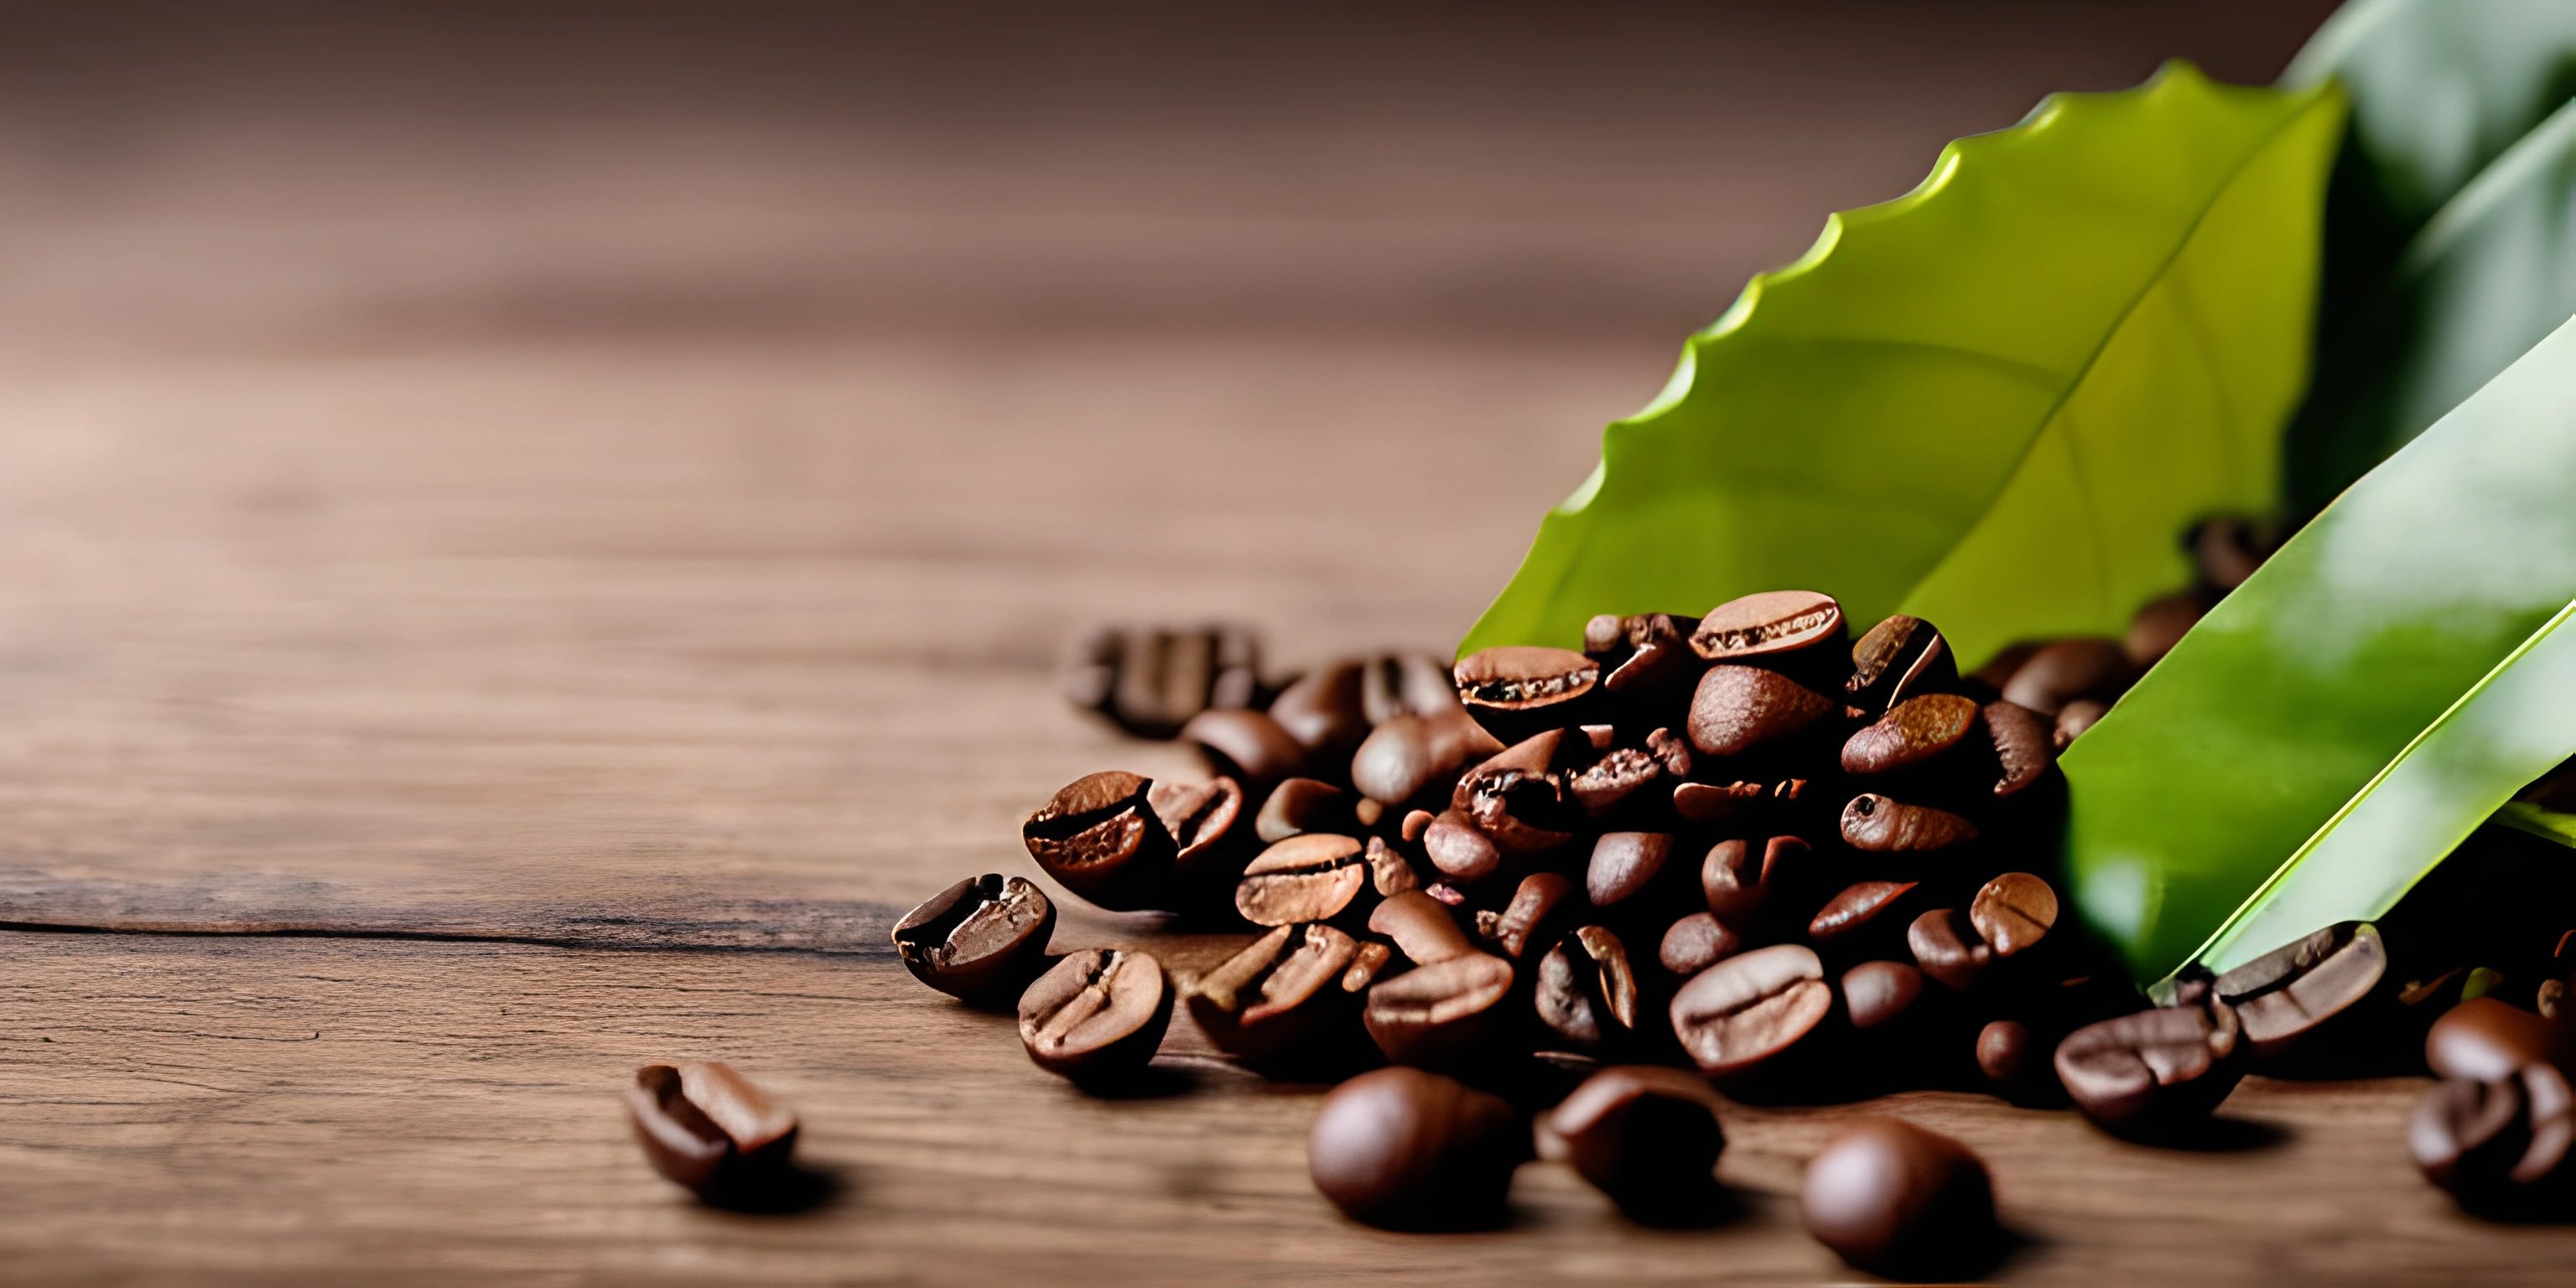 a bag of coffee beans on top of coffee beans with leaves lying around it on a wooden surface